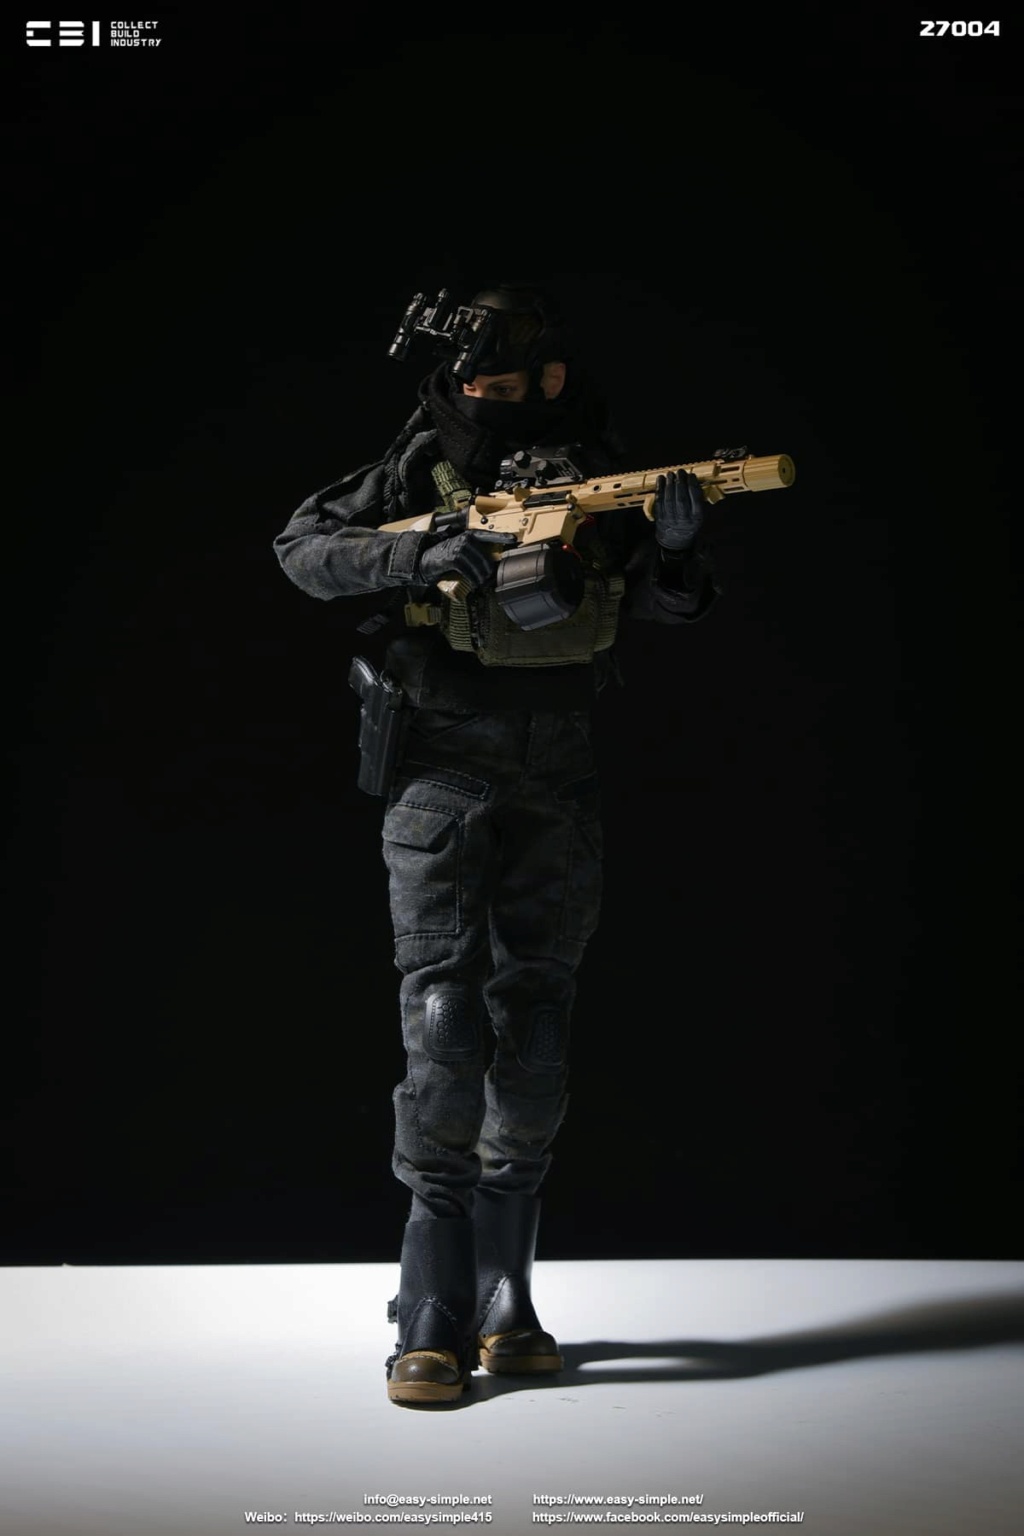 female - NEW PRODUCT: CBI & Easy&Simple: 27004 1/6 ERICA STORM - TASK FORCE 58 CPO action figure 3770